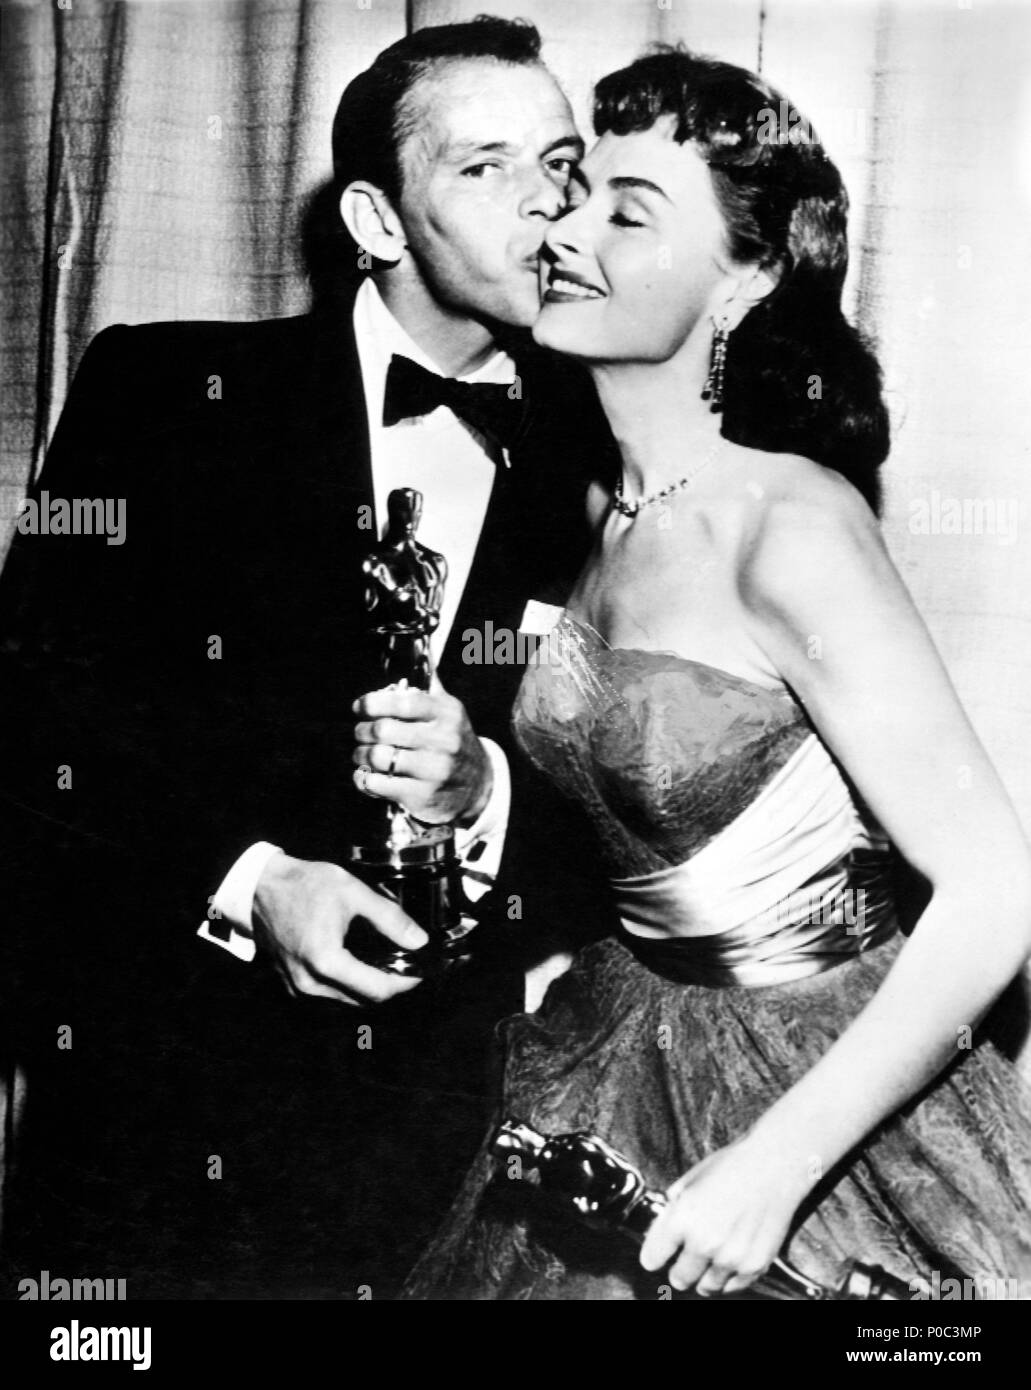 Description: 26th Annual Academy Awards (1954). Fran Sinatra, best actor in a supporting role for 'Fom Here to Eternety'. Donna Redd, best actress in a supporting role for 'From Here to Eternety'..  Year: 1954.  Stars: DONNA REED; FRANK SINATRA. Stock Photo